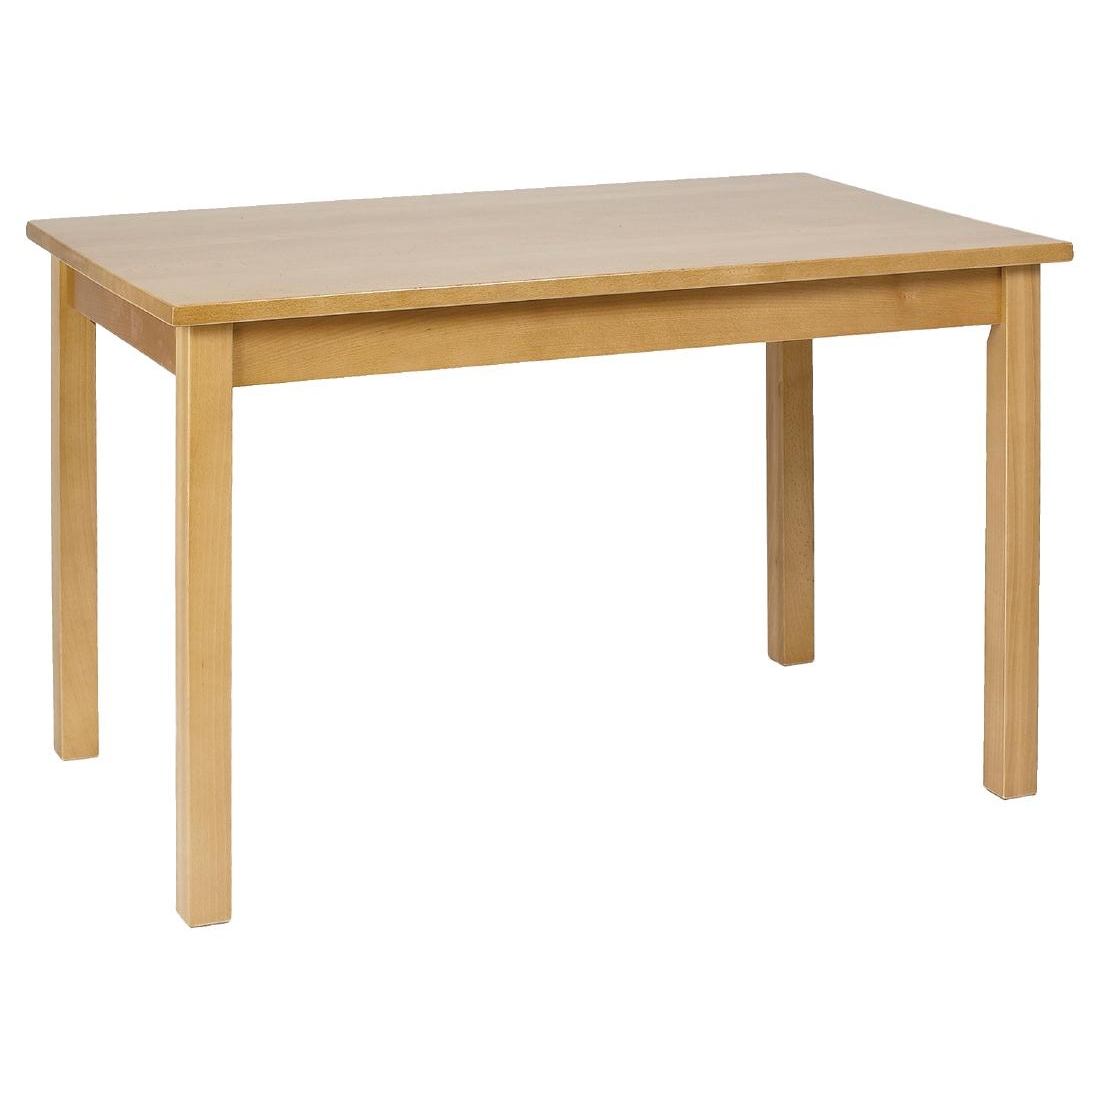 Dining Table Wooden Natural Finish 1220mm